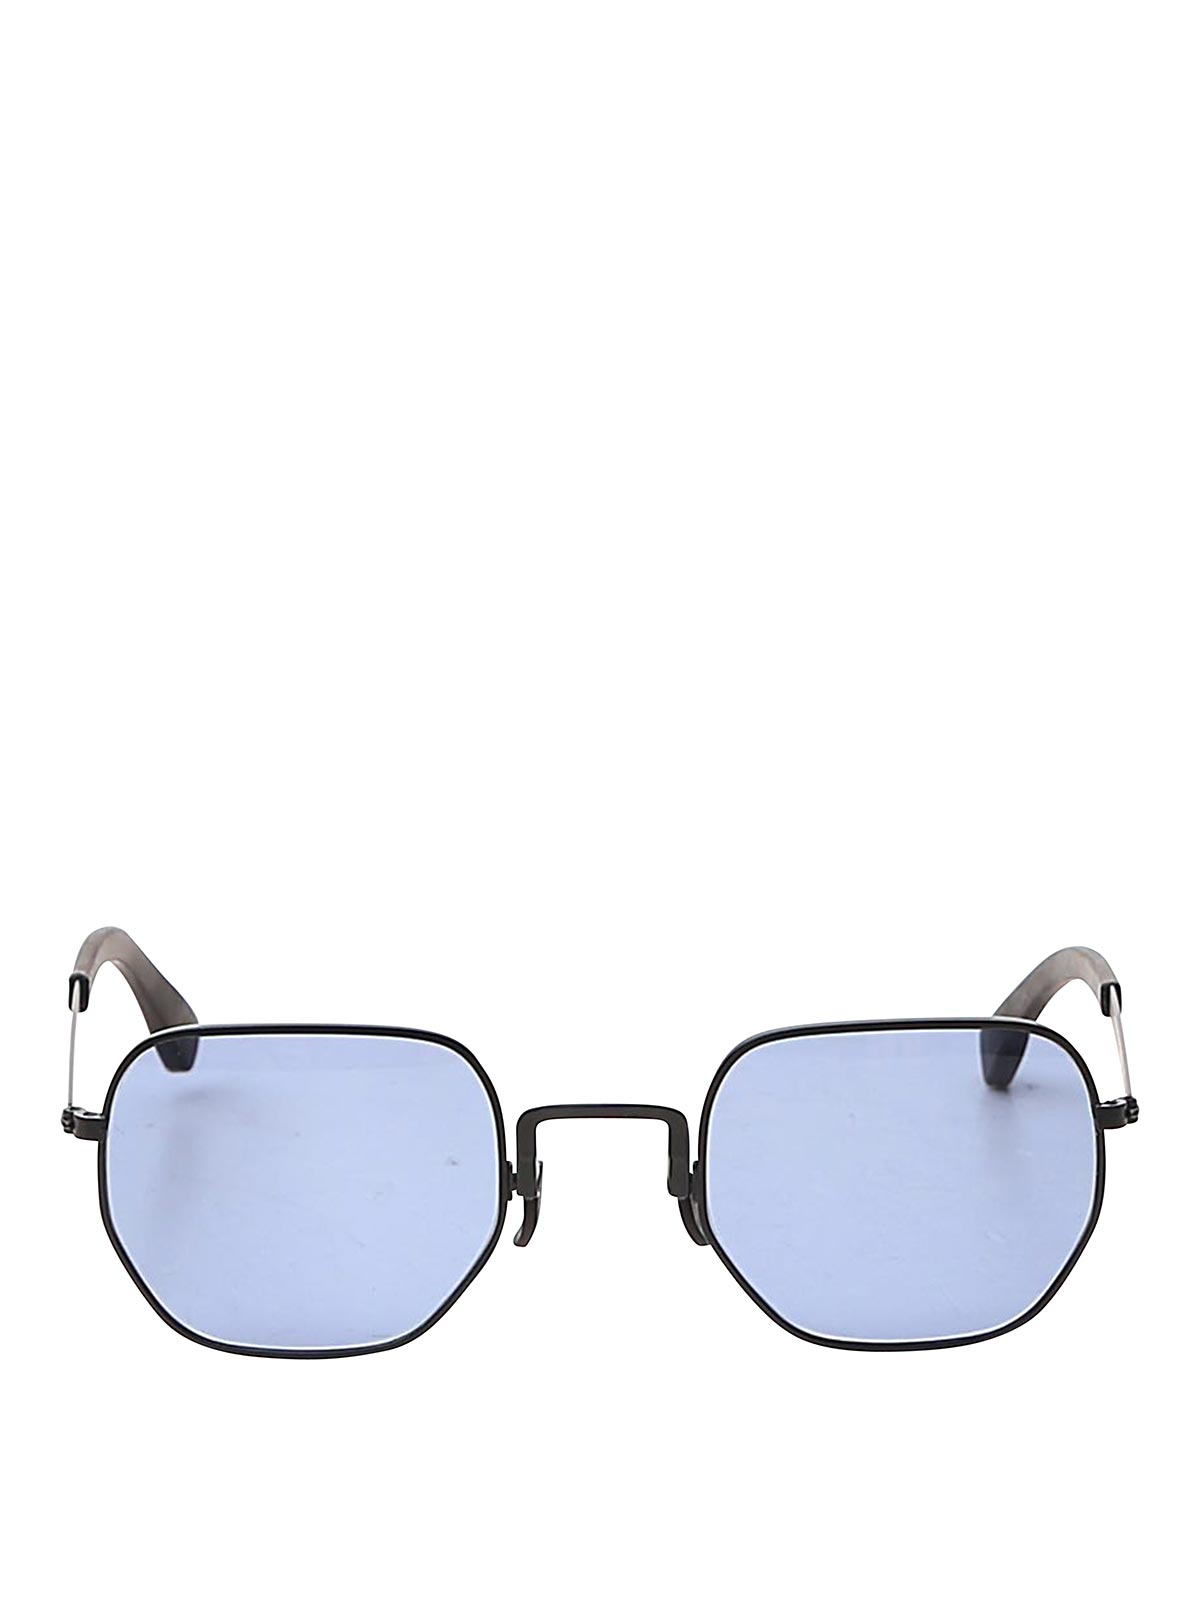 Movitra Sunglasses In Matte Black With Blue Lenses